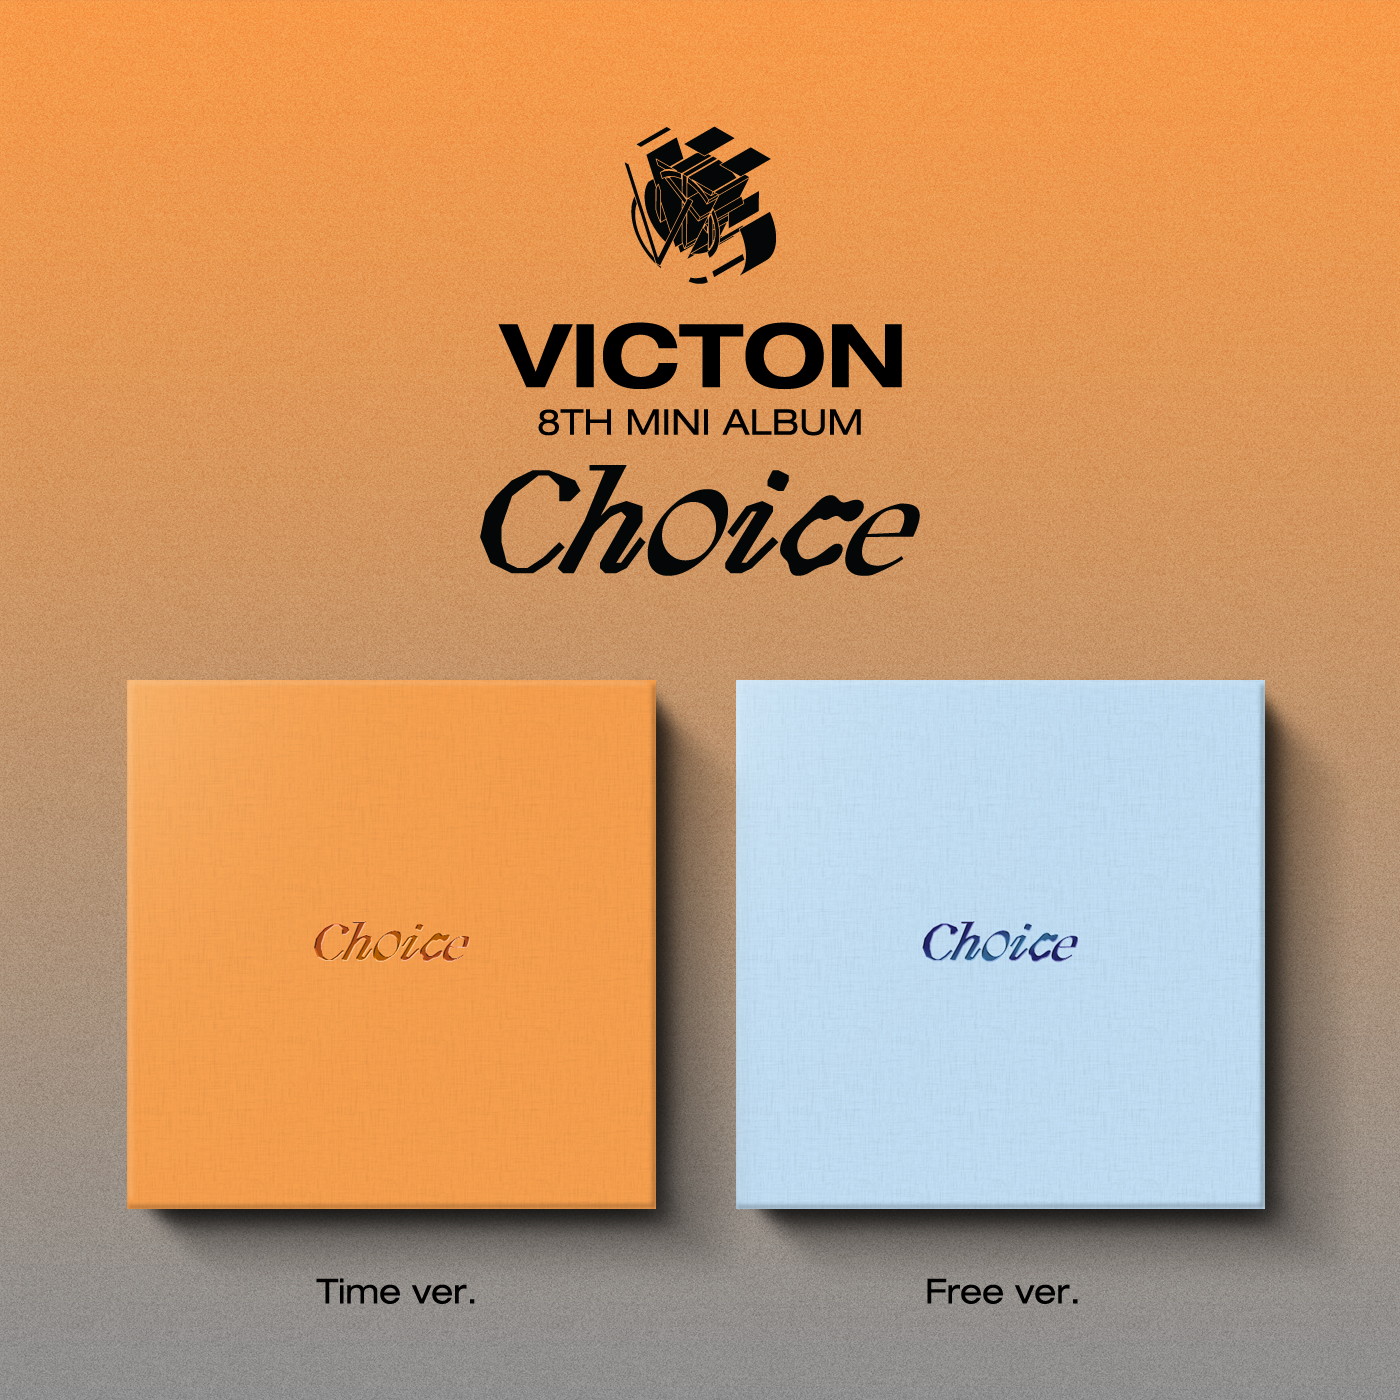 [2CD セット] VICTON - ミニアルバム8集 [Choice] (Time ver. + Free ver.) 